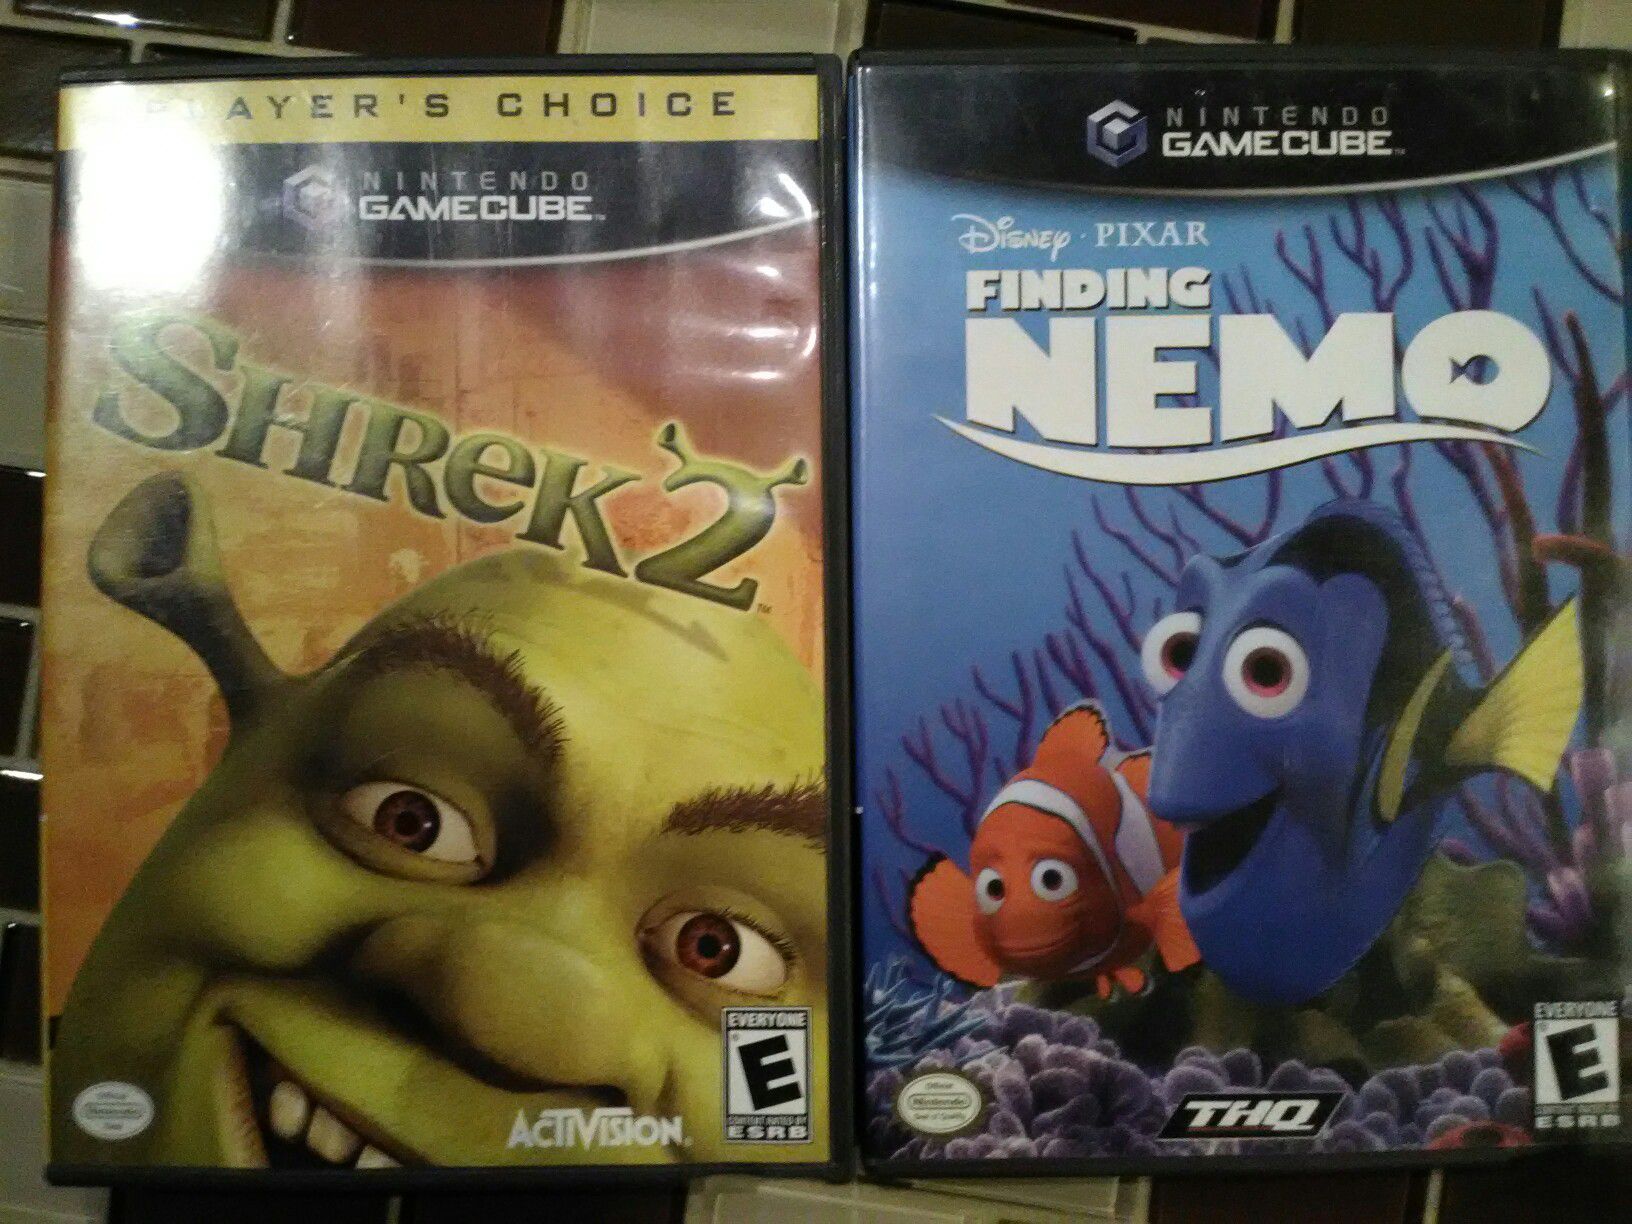 2 GameCube games for $7